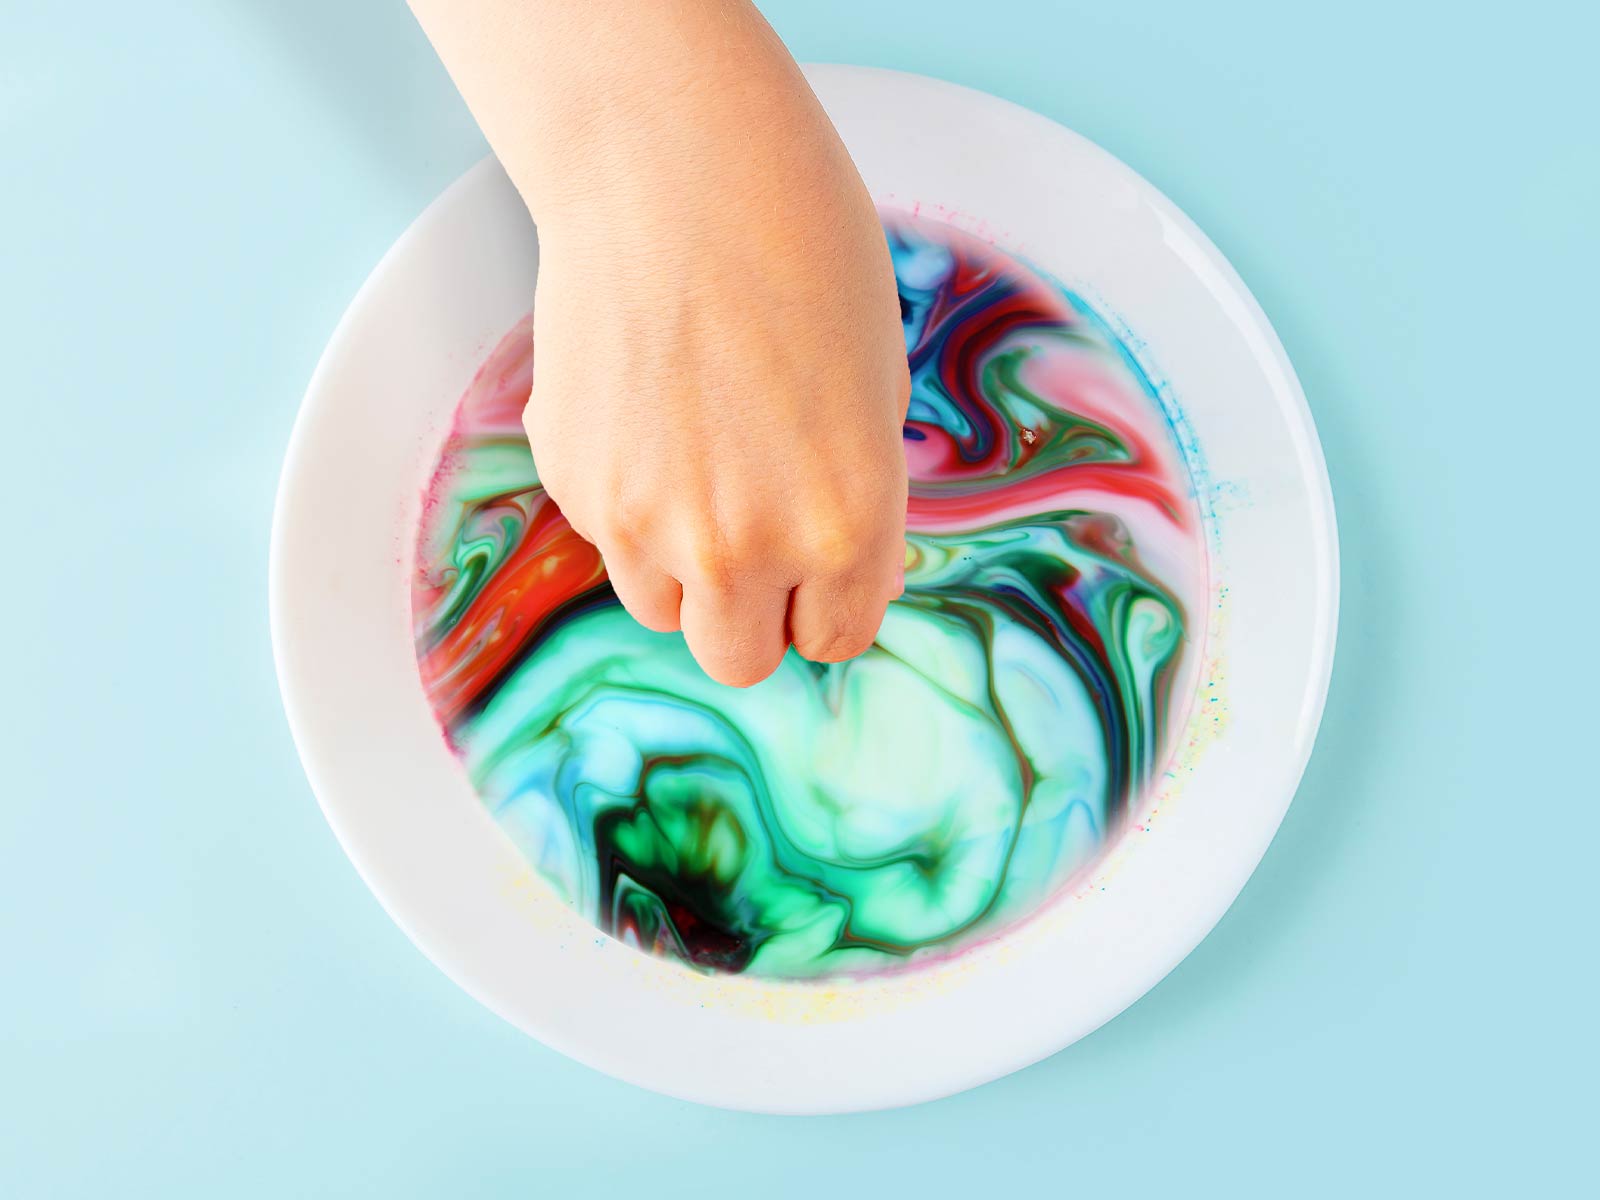 Experiment with bowl of milk and dye